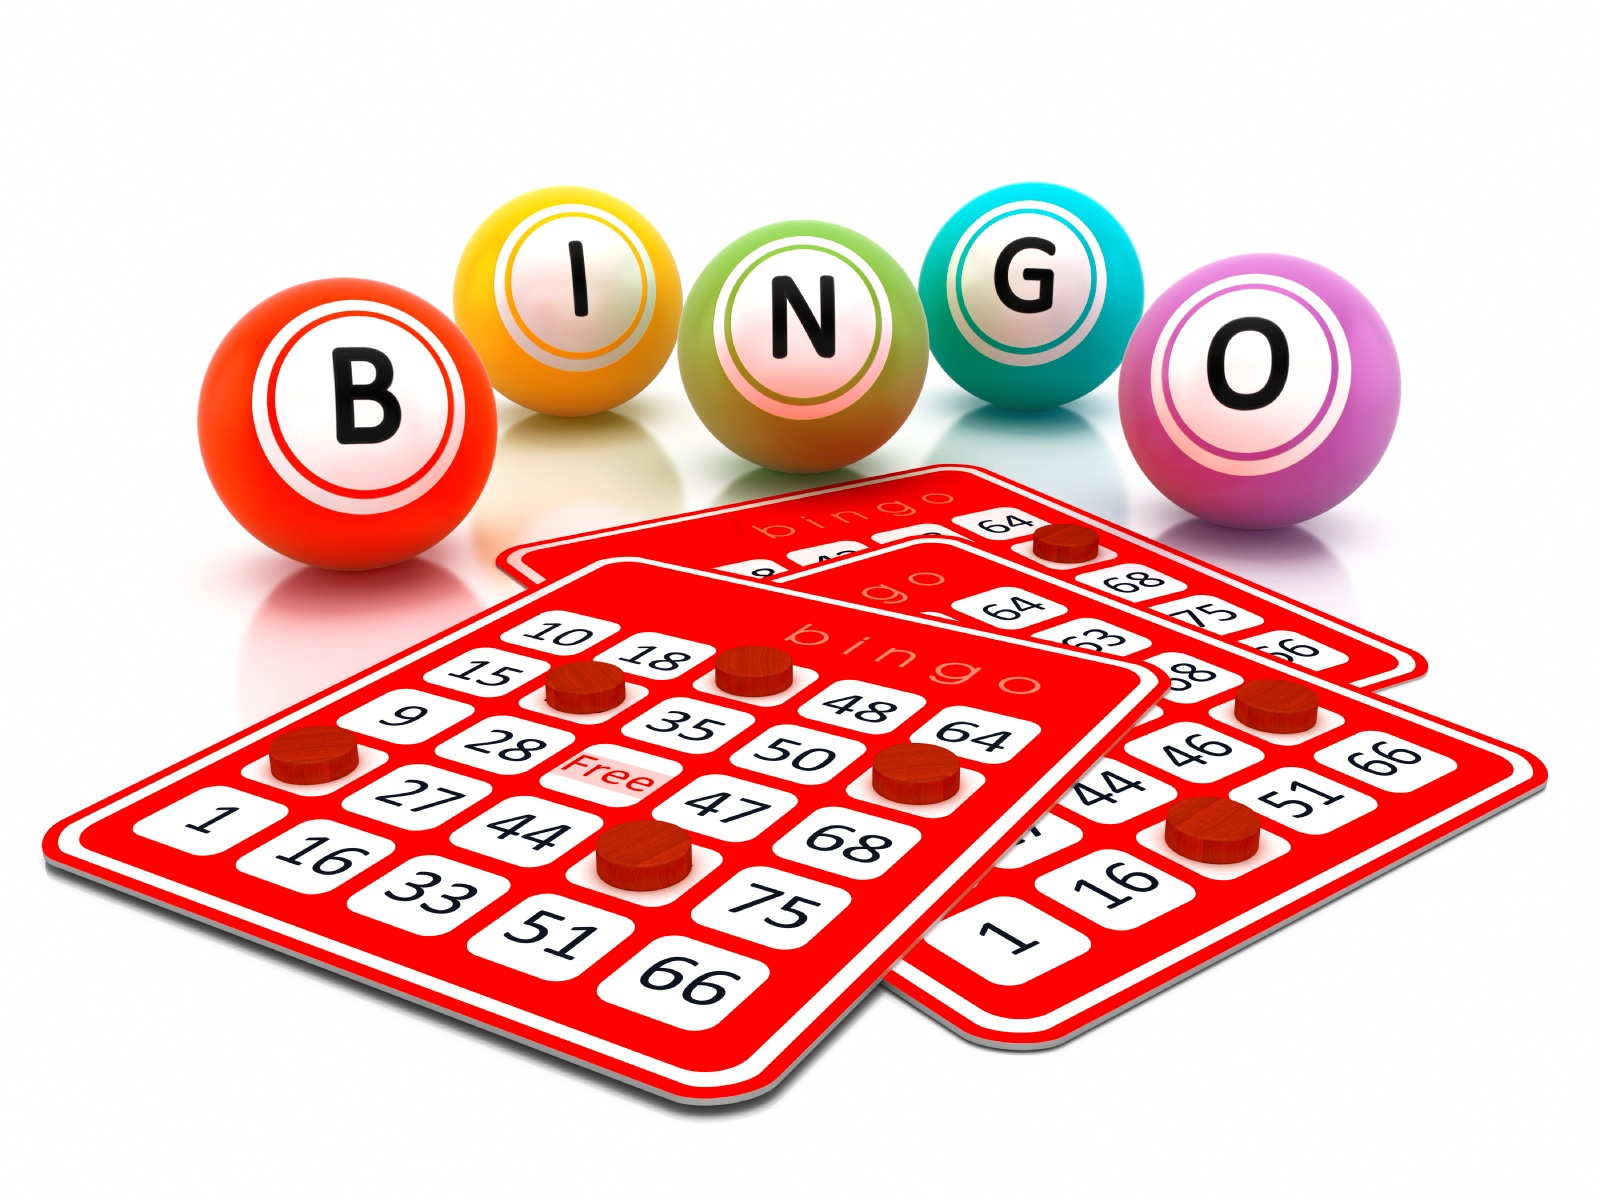 FUN BINGO GAMES TO TRY YOUR HANDS ON